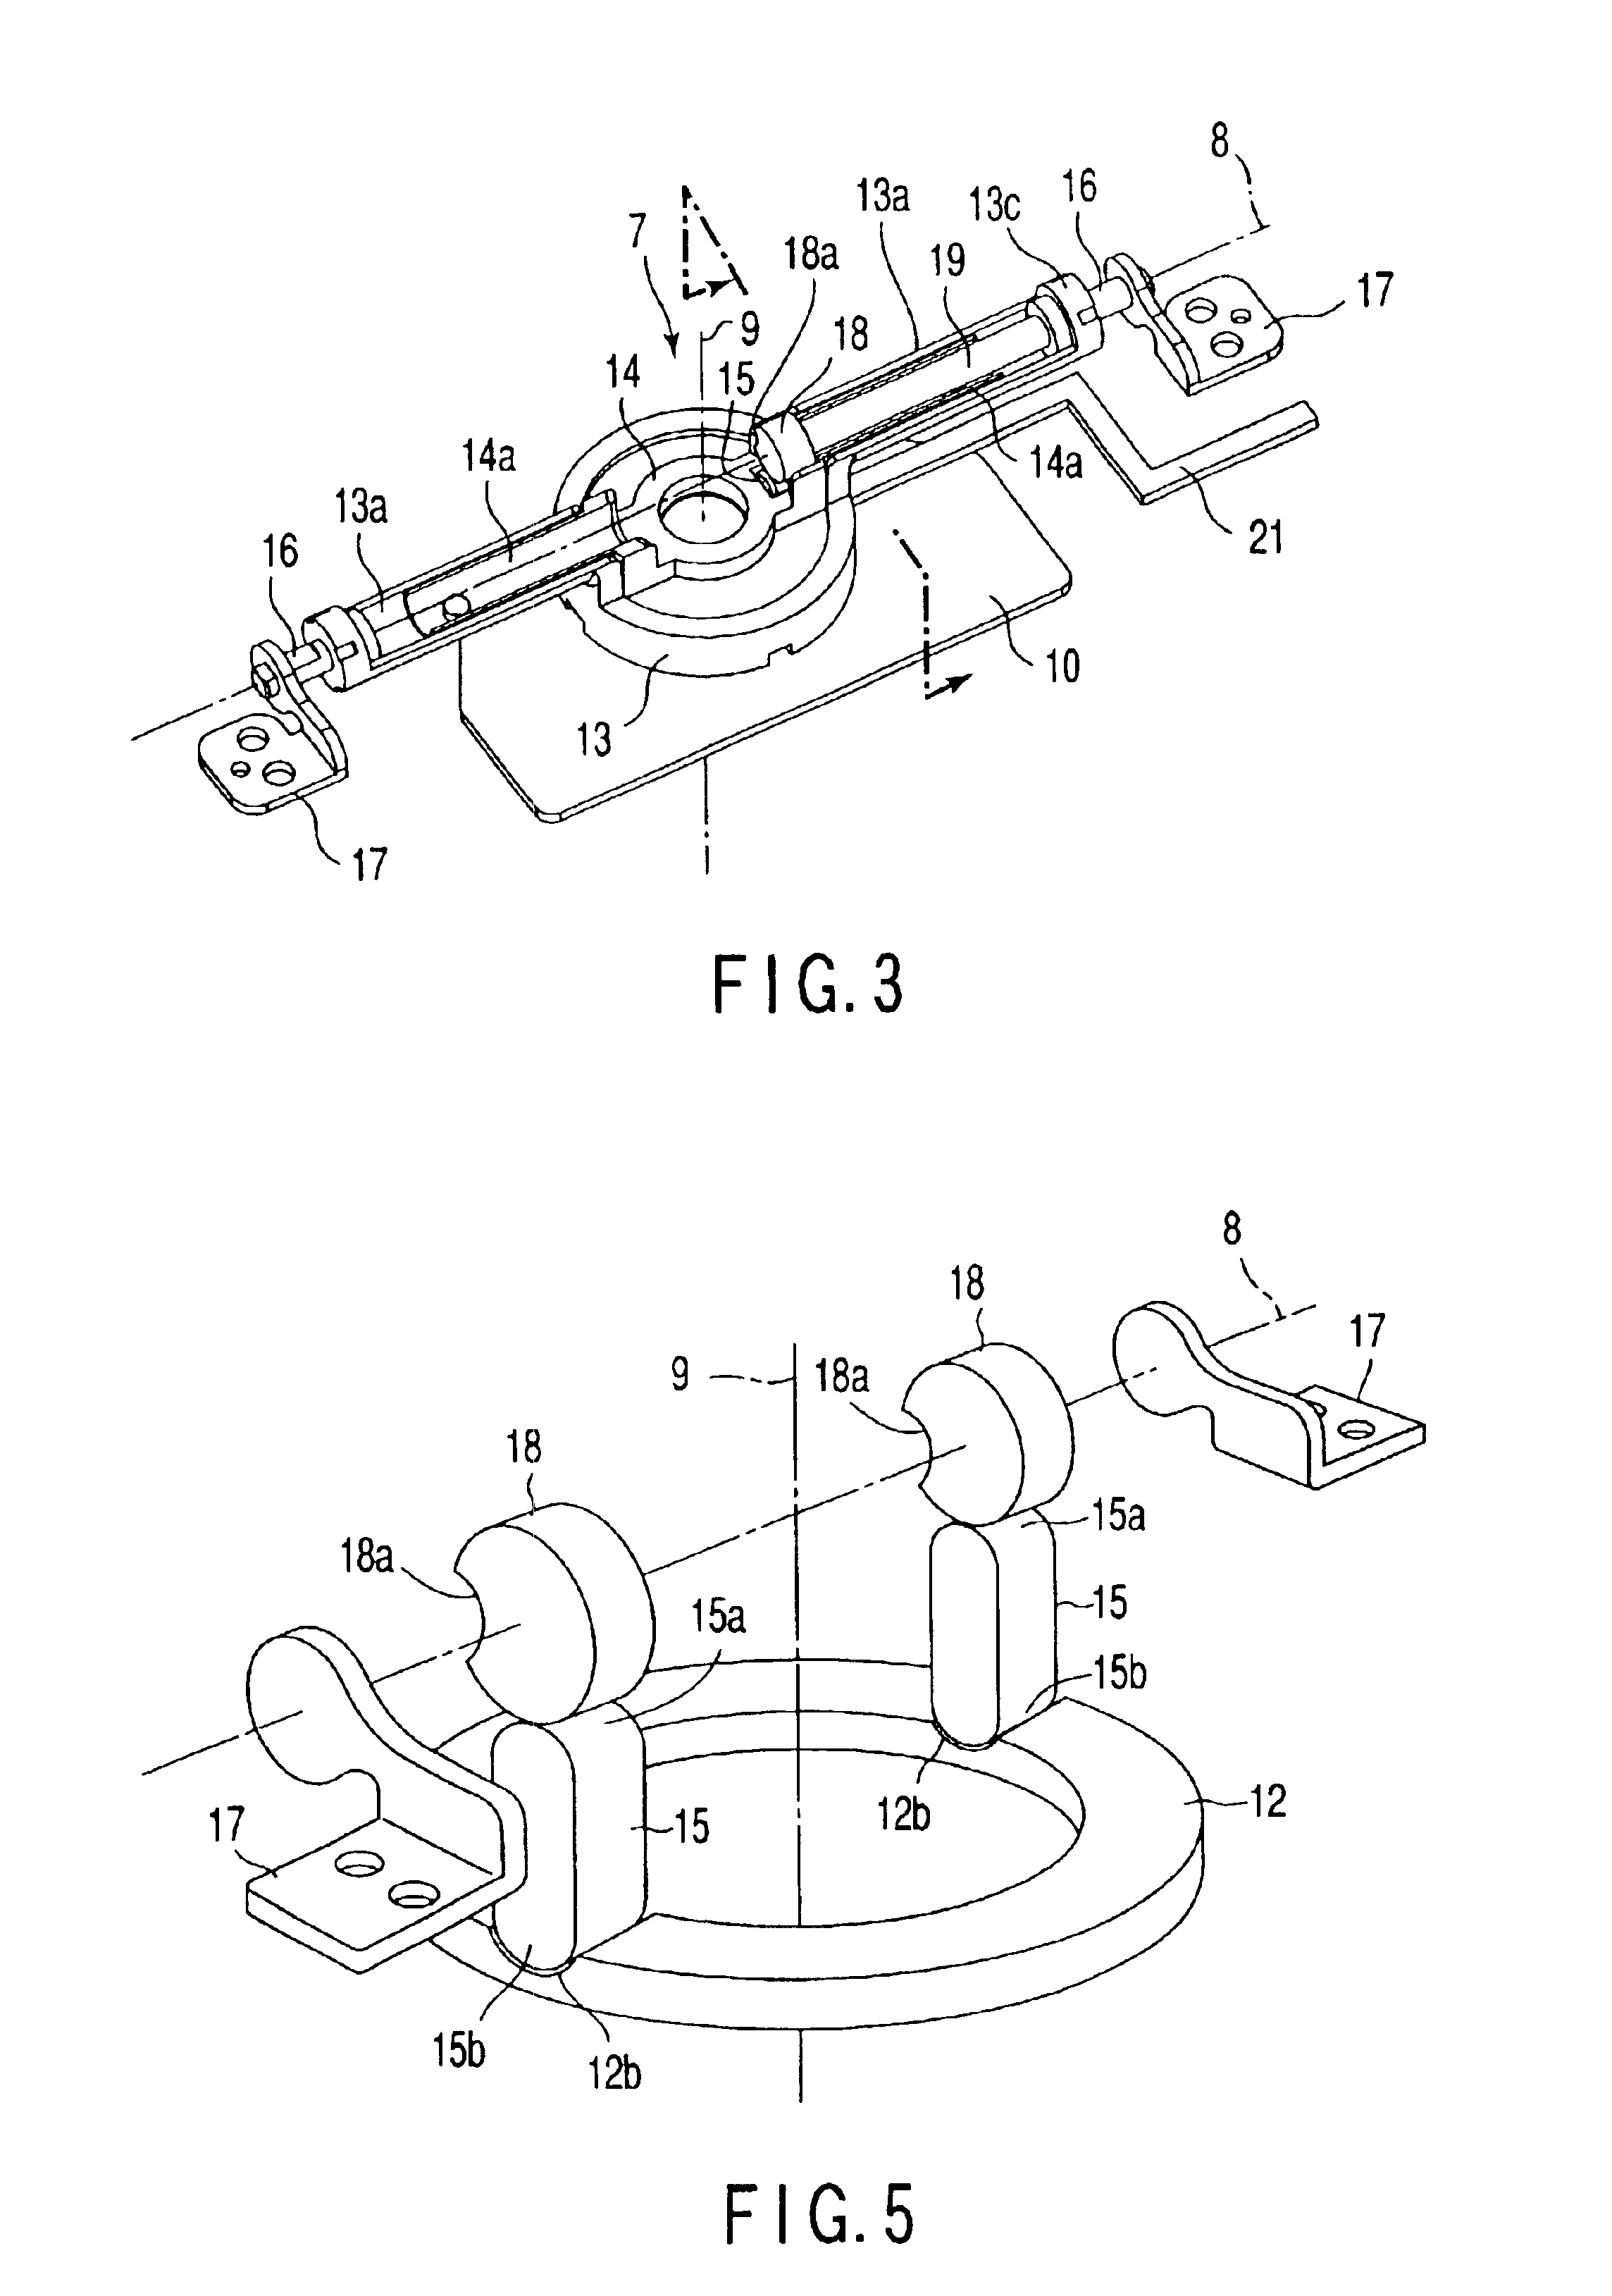 Electronic apparatus having two housings coupled by hinge mechanism, one of which is reversible to the other